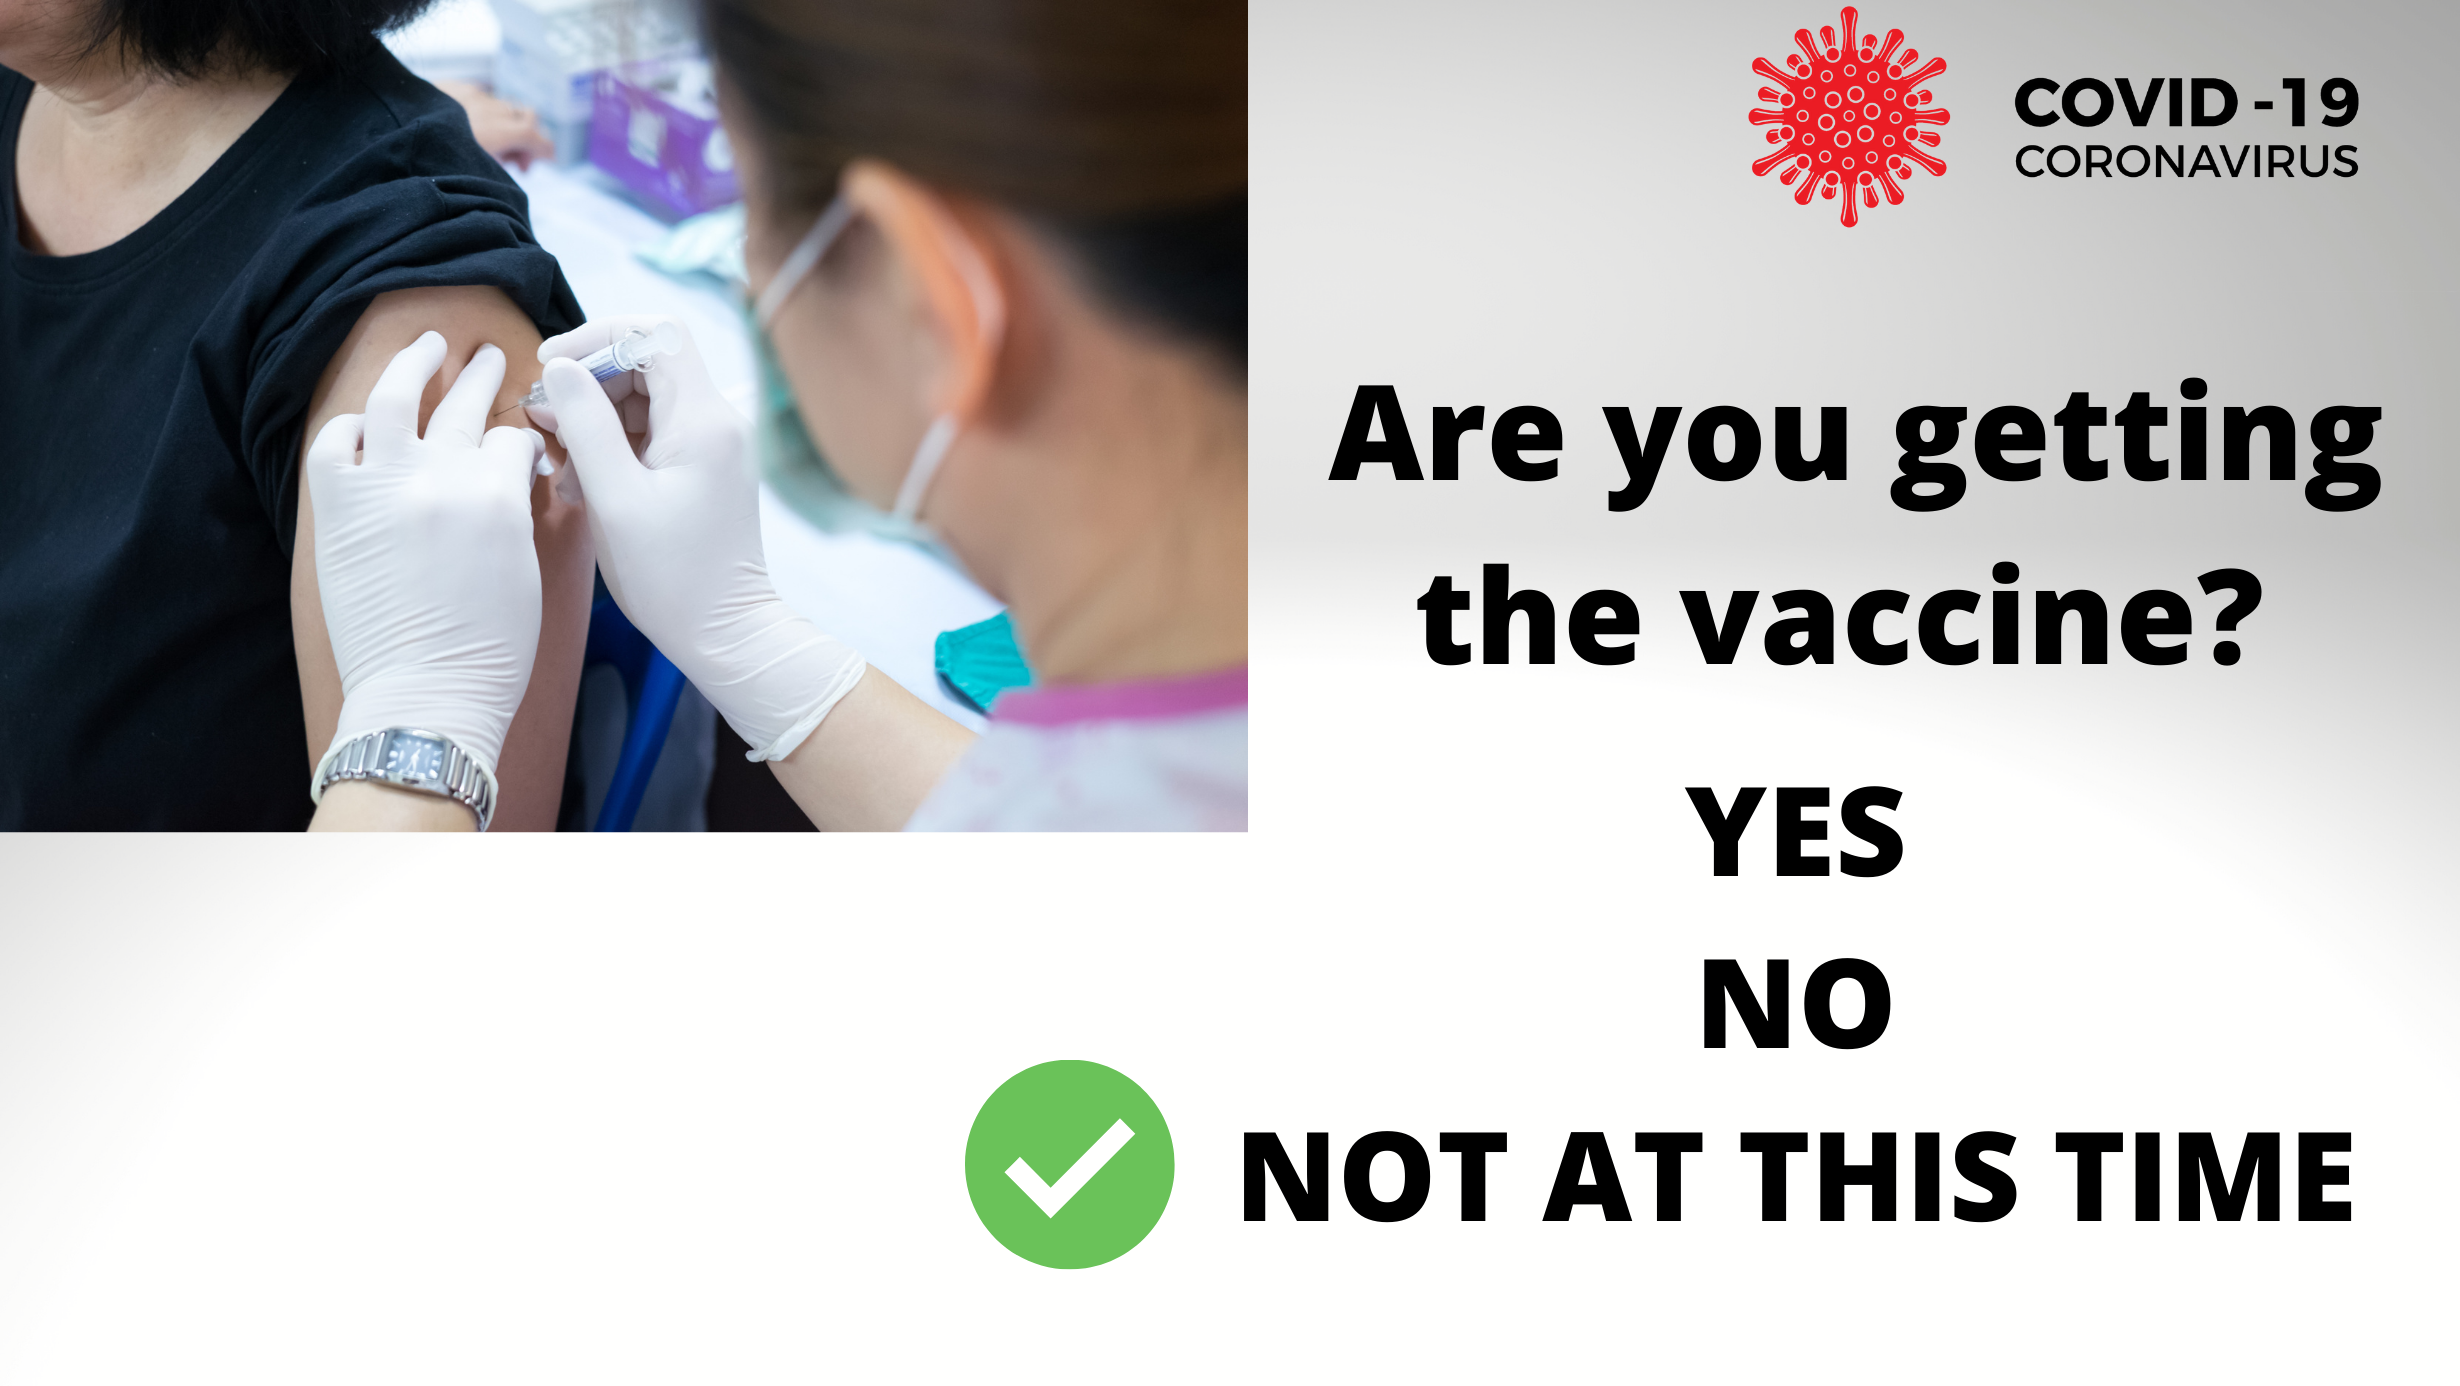 I am not an “ANTI-VAXXER”. I just don’t want the COVID vaccine.